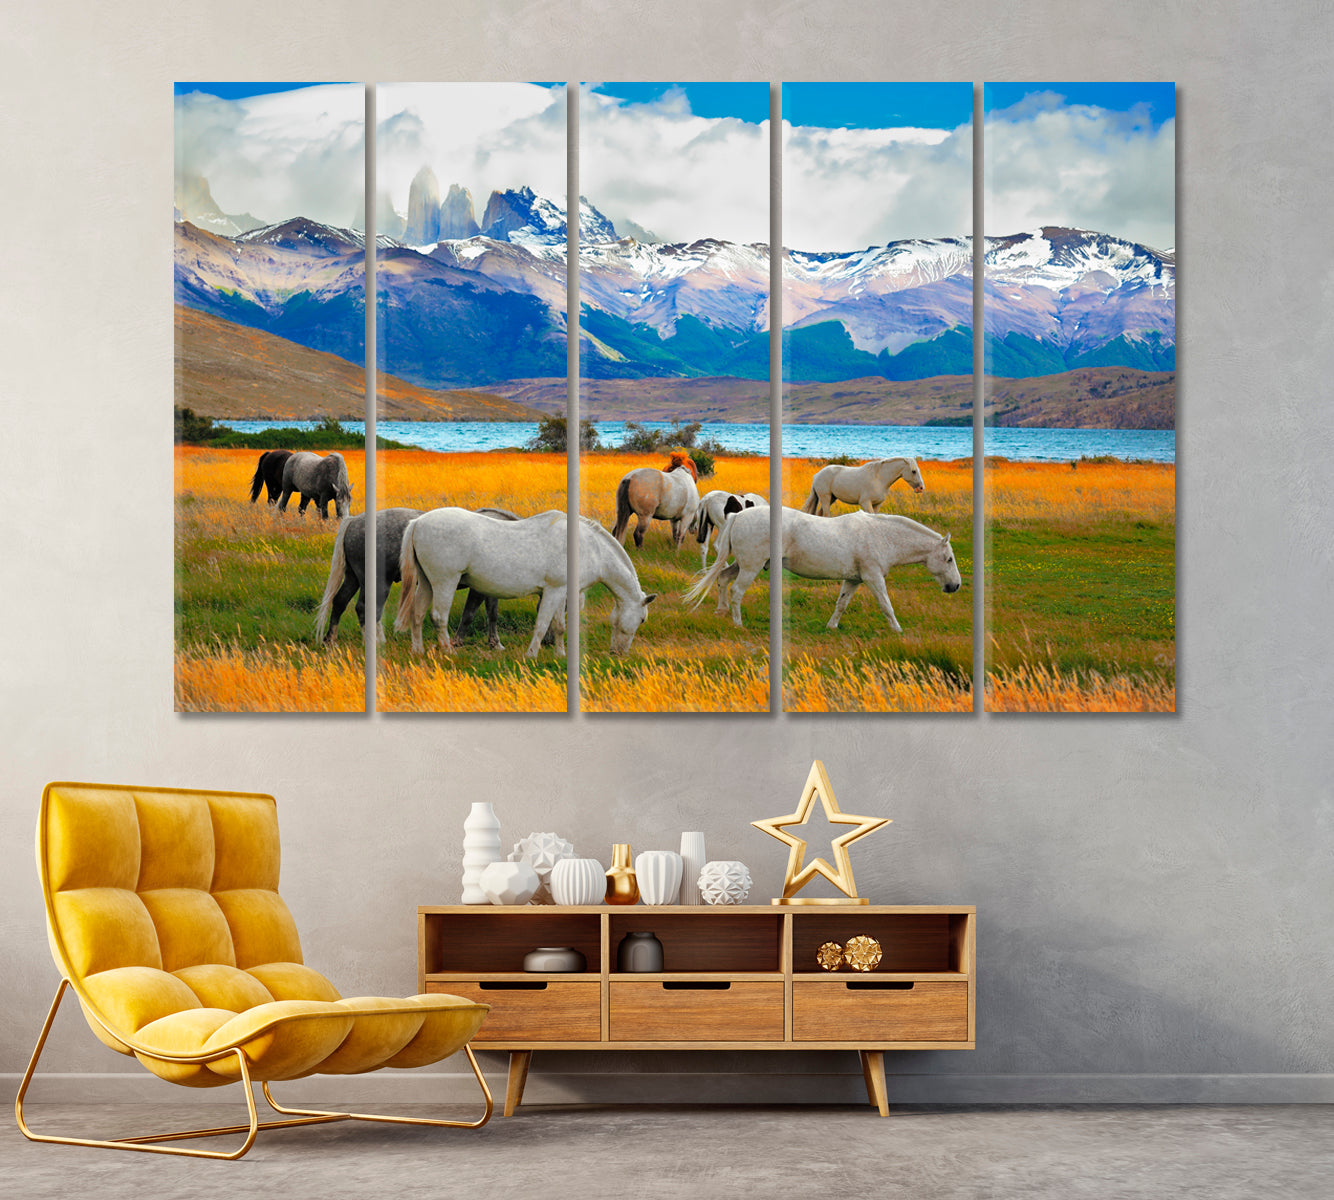 Horses in Torres del Paine National Park Canvas Print ArtLexy 5 Panels 36"x24" inches 